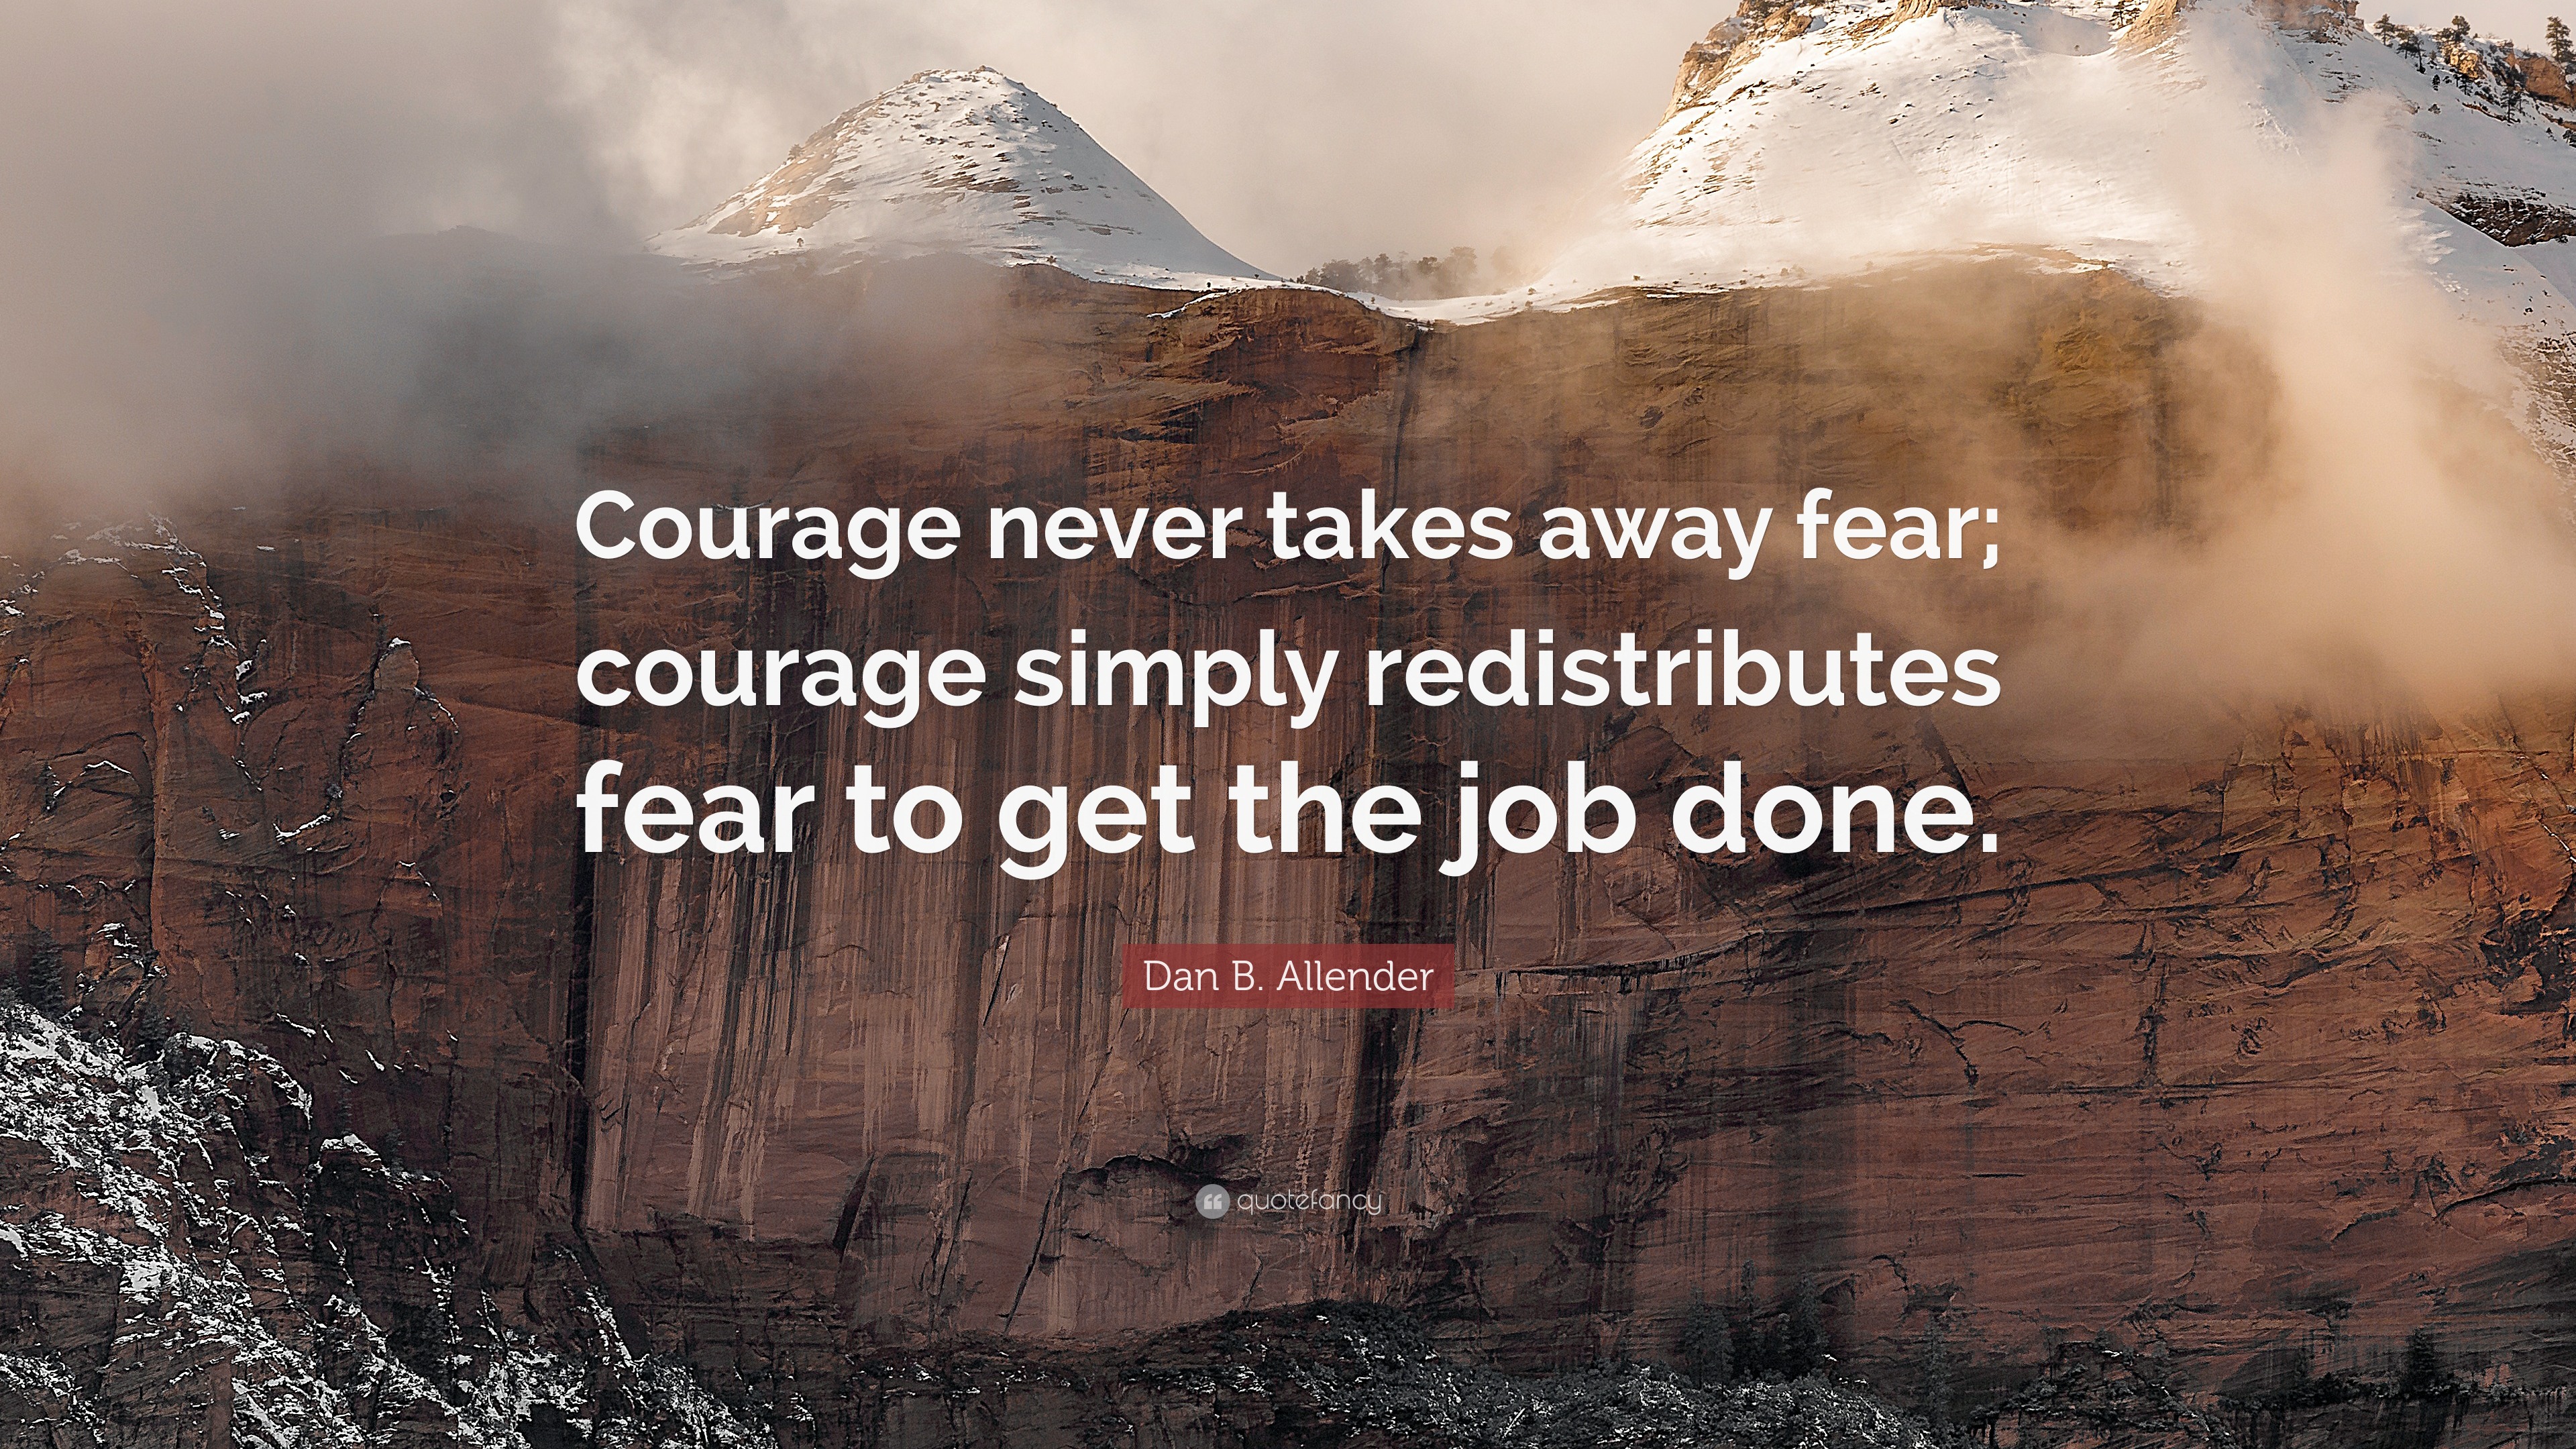 Dan B. Allender Quote: “Courage never takes away fear; courage simply ...